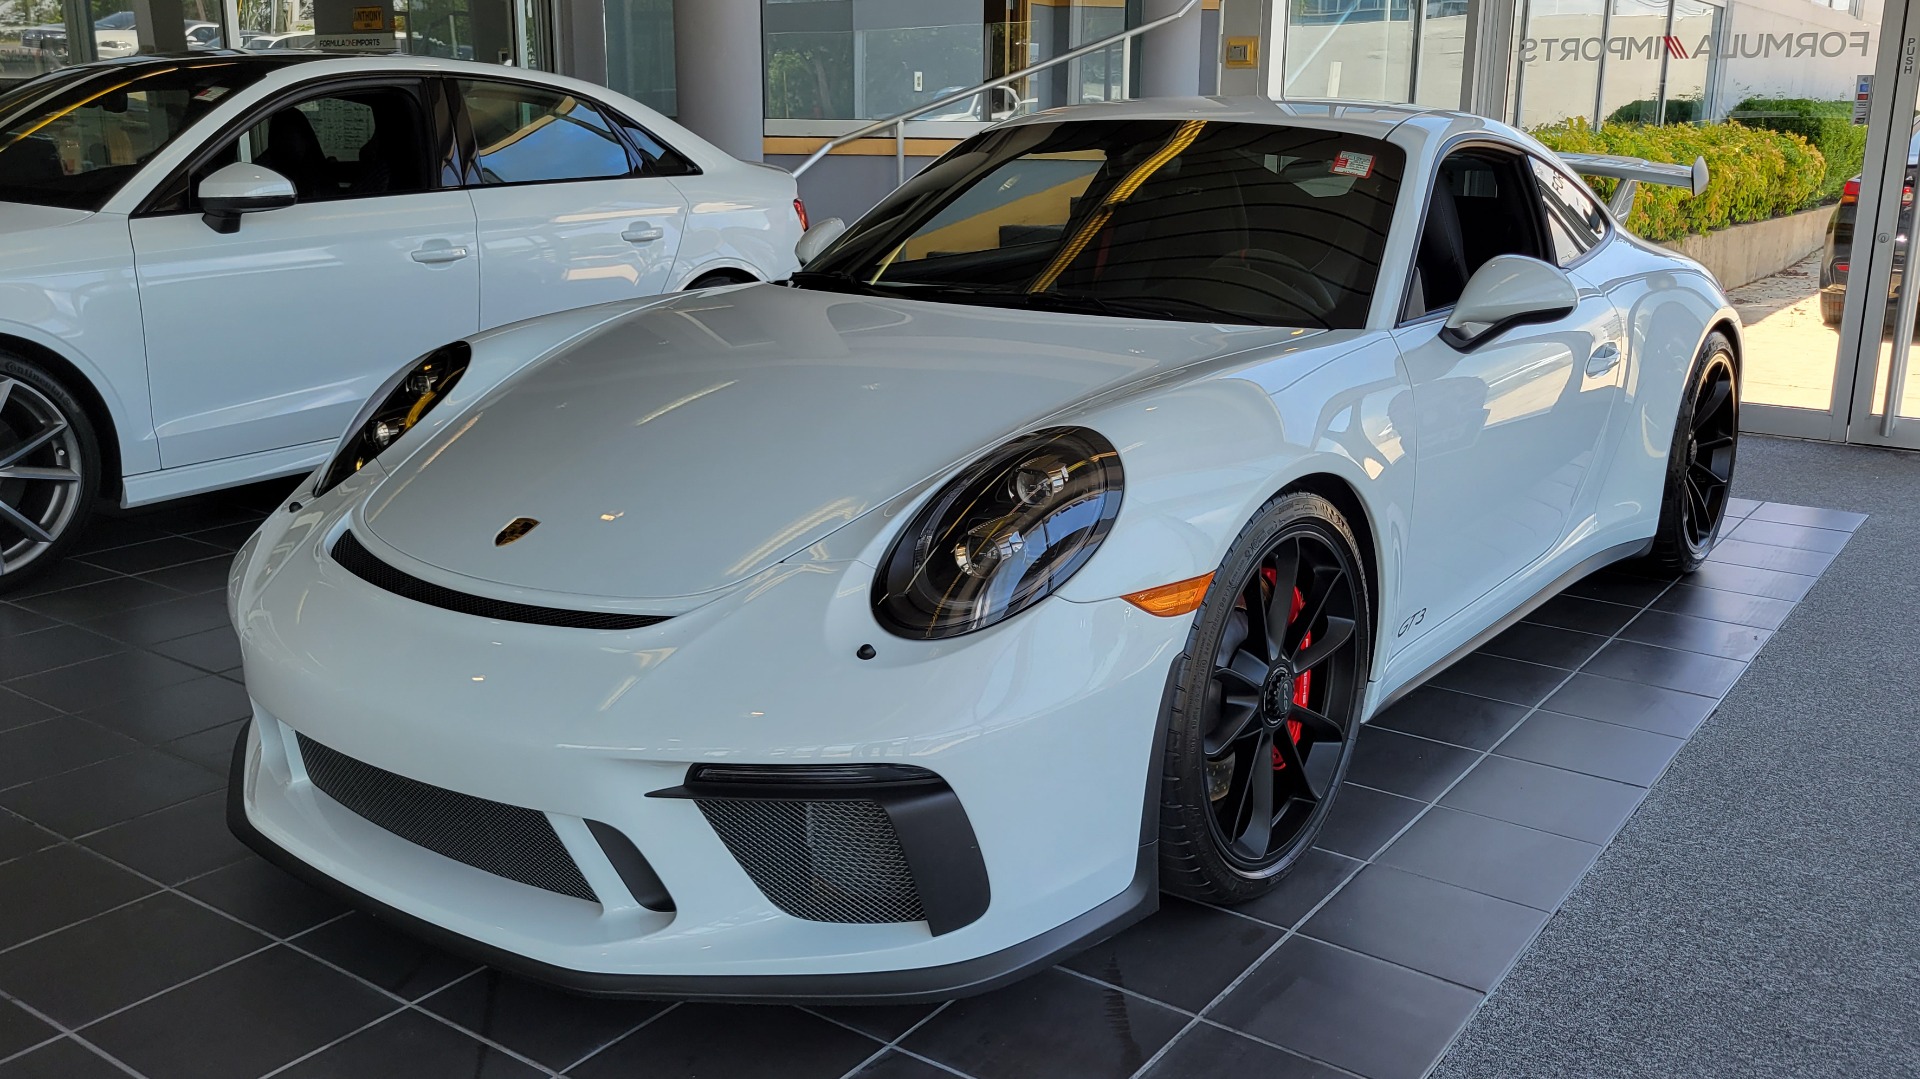 Used 2019 Porsche 911 GT3 4.0L 520HP COUPE / PDK 7-SPD / BOSE / APPLE / REARVIEW for sale $203,995 at Formula Imports in Charlotte NC 28227 1